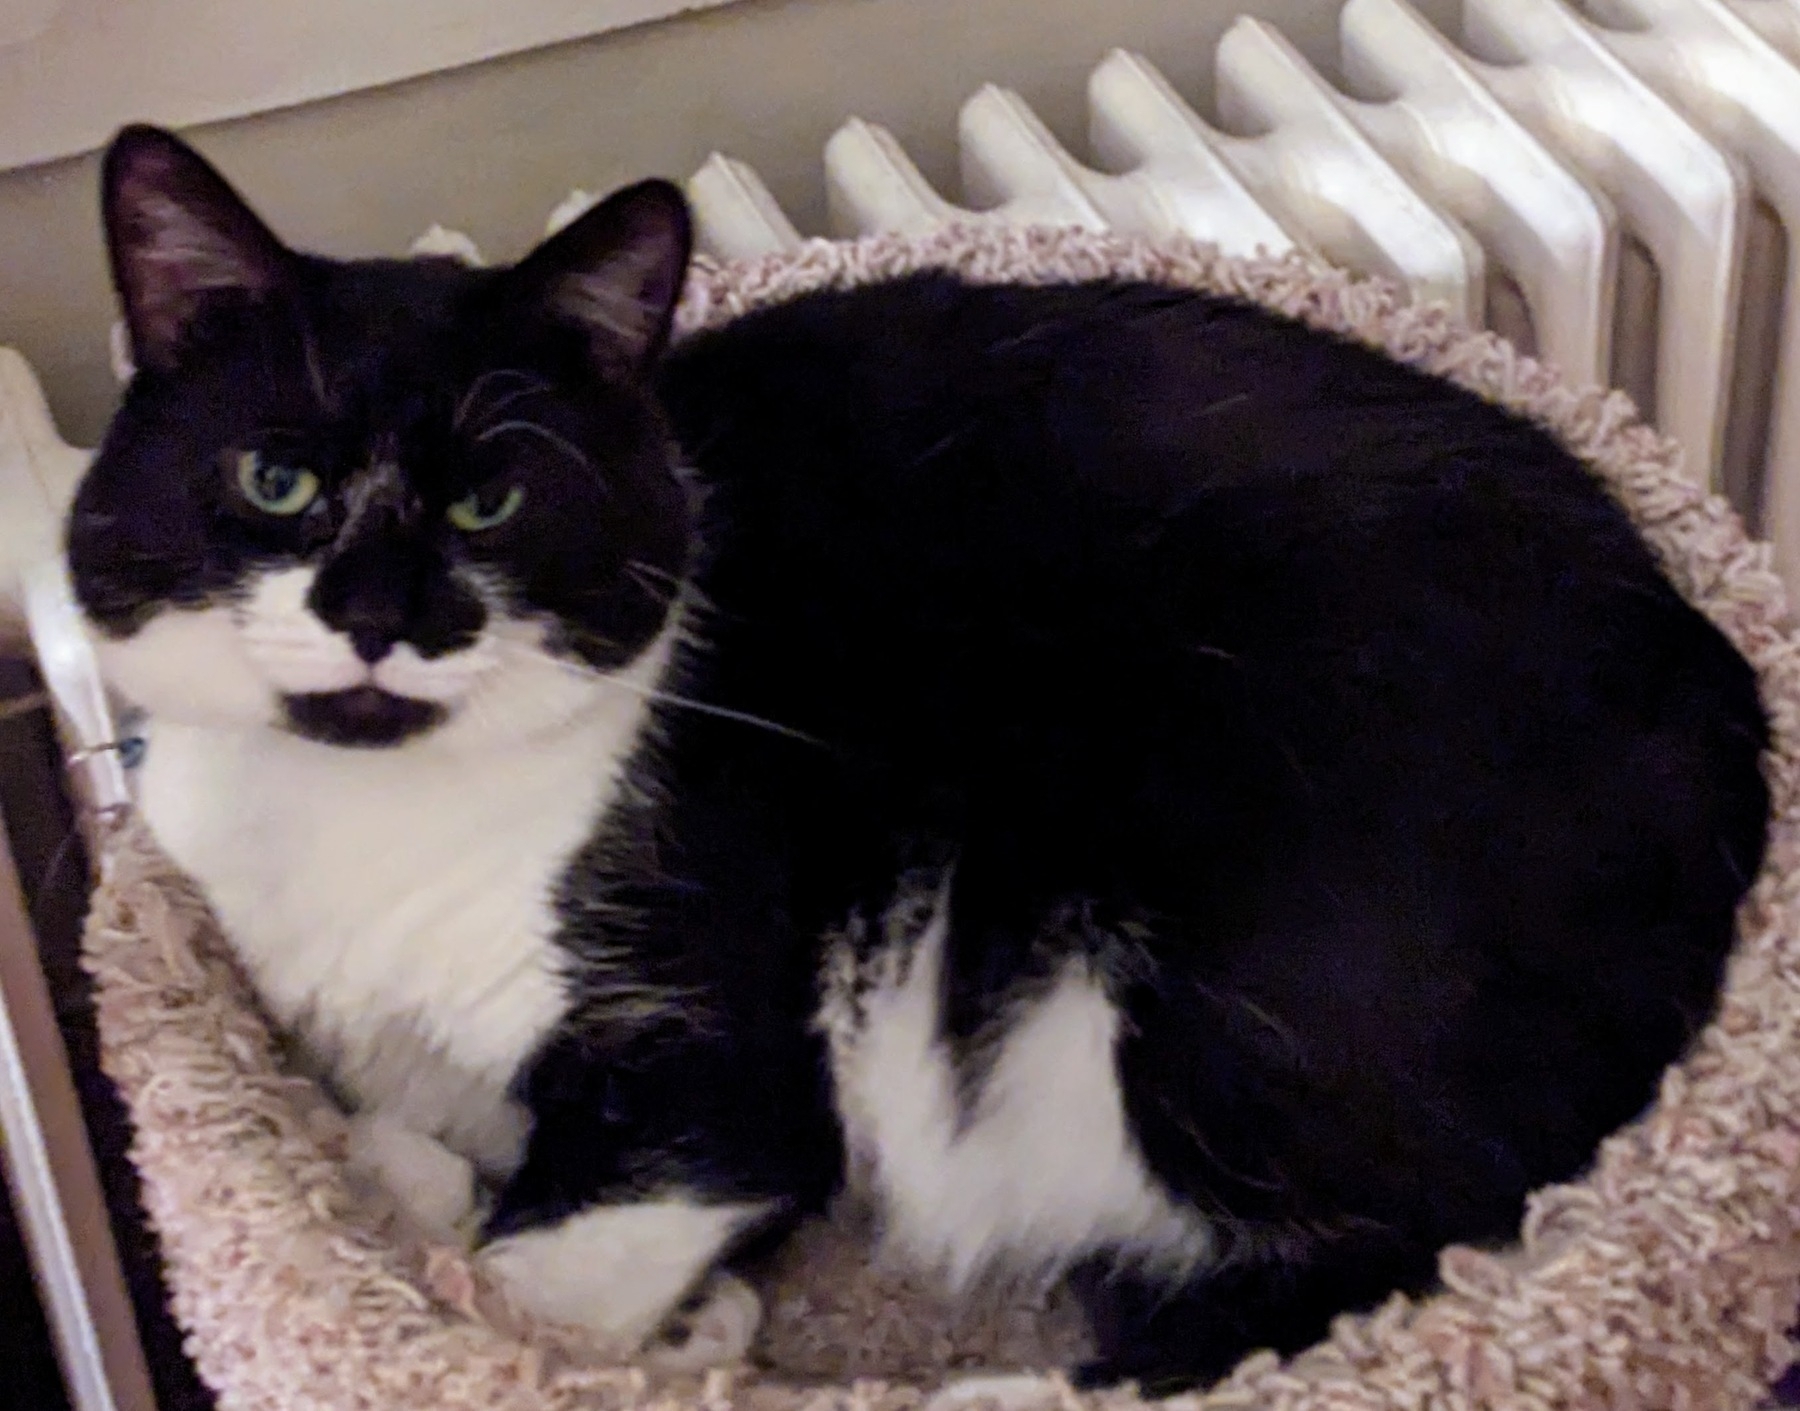 black and white cat curled up in cat bed